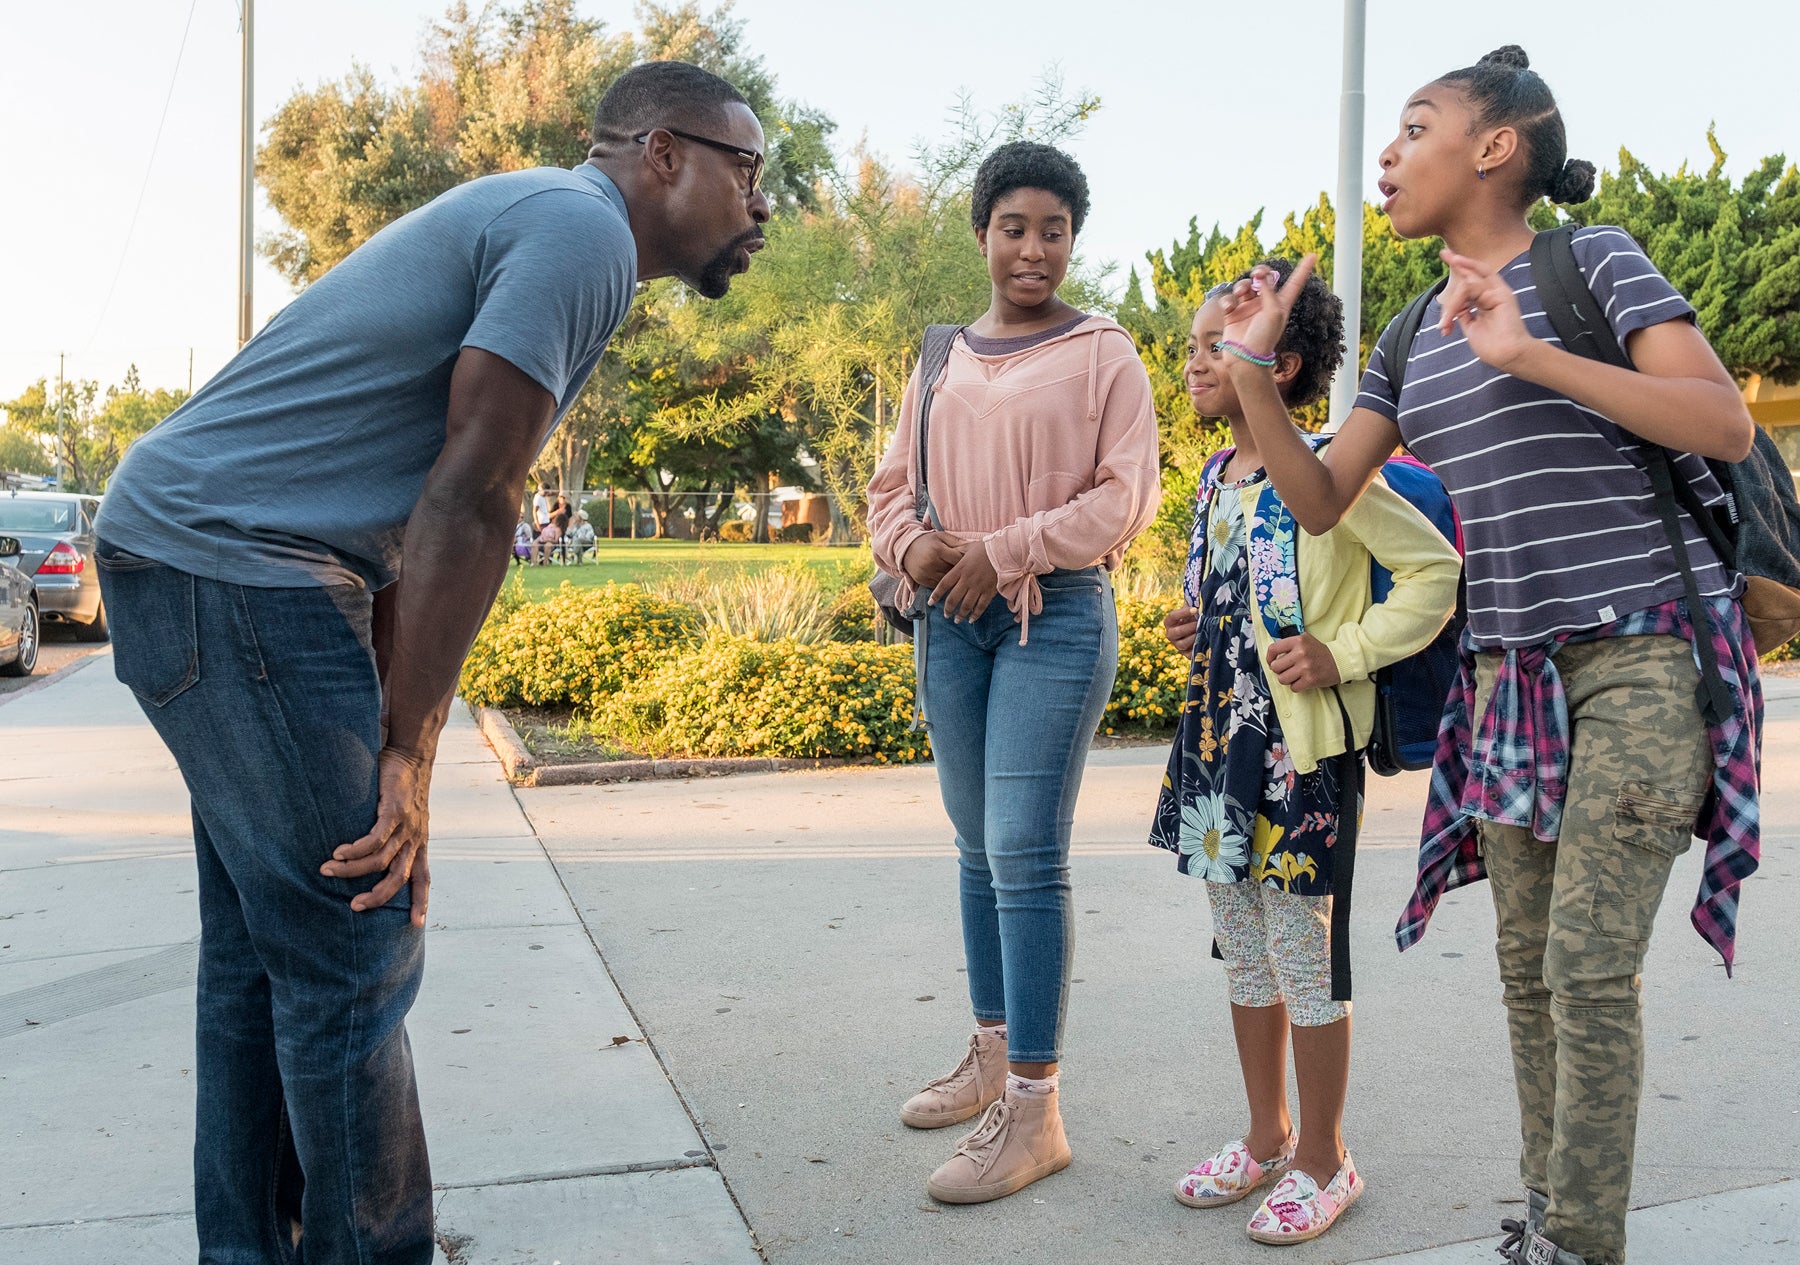 Randall Pearson (Sterling K. Brown) crouches to speak to his daughters in an outdoor scene in an episode of This Is Us.